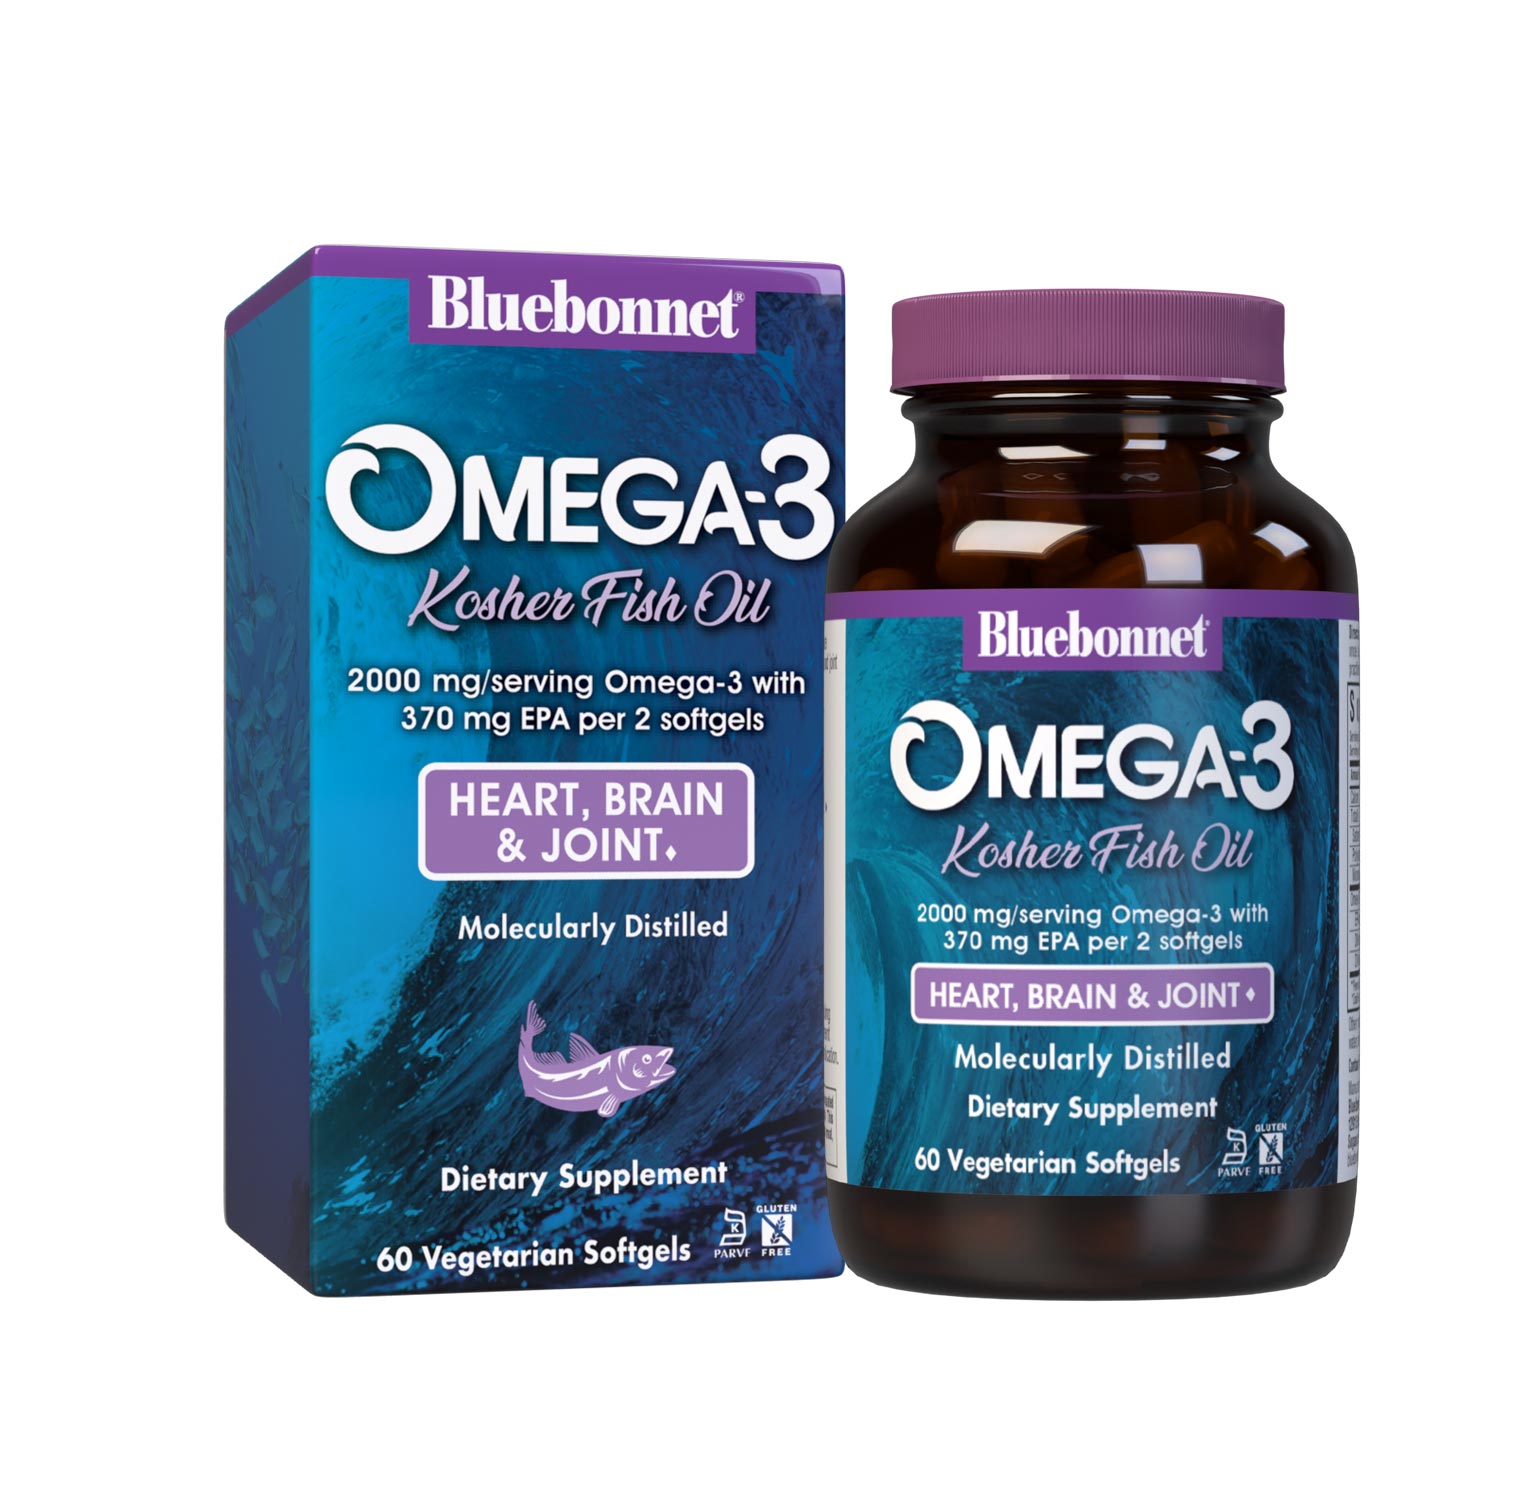 Omega-3 Kosher Fish Oil 60 Vegetarian Softgels are formulated with EPA, DHA and DPA to help support heart, brain and joint health by utilizing refined omega-3s from wild ocean fish. Packaging #size_60 count